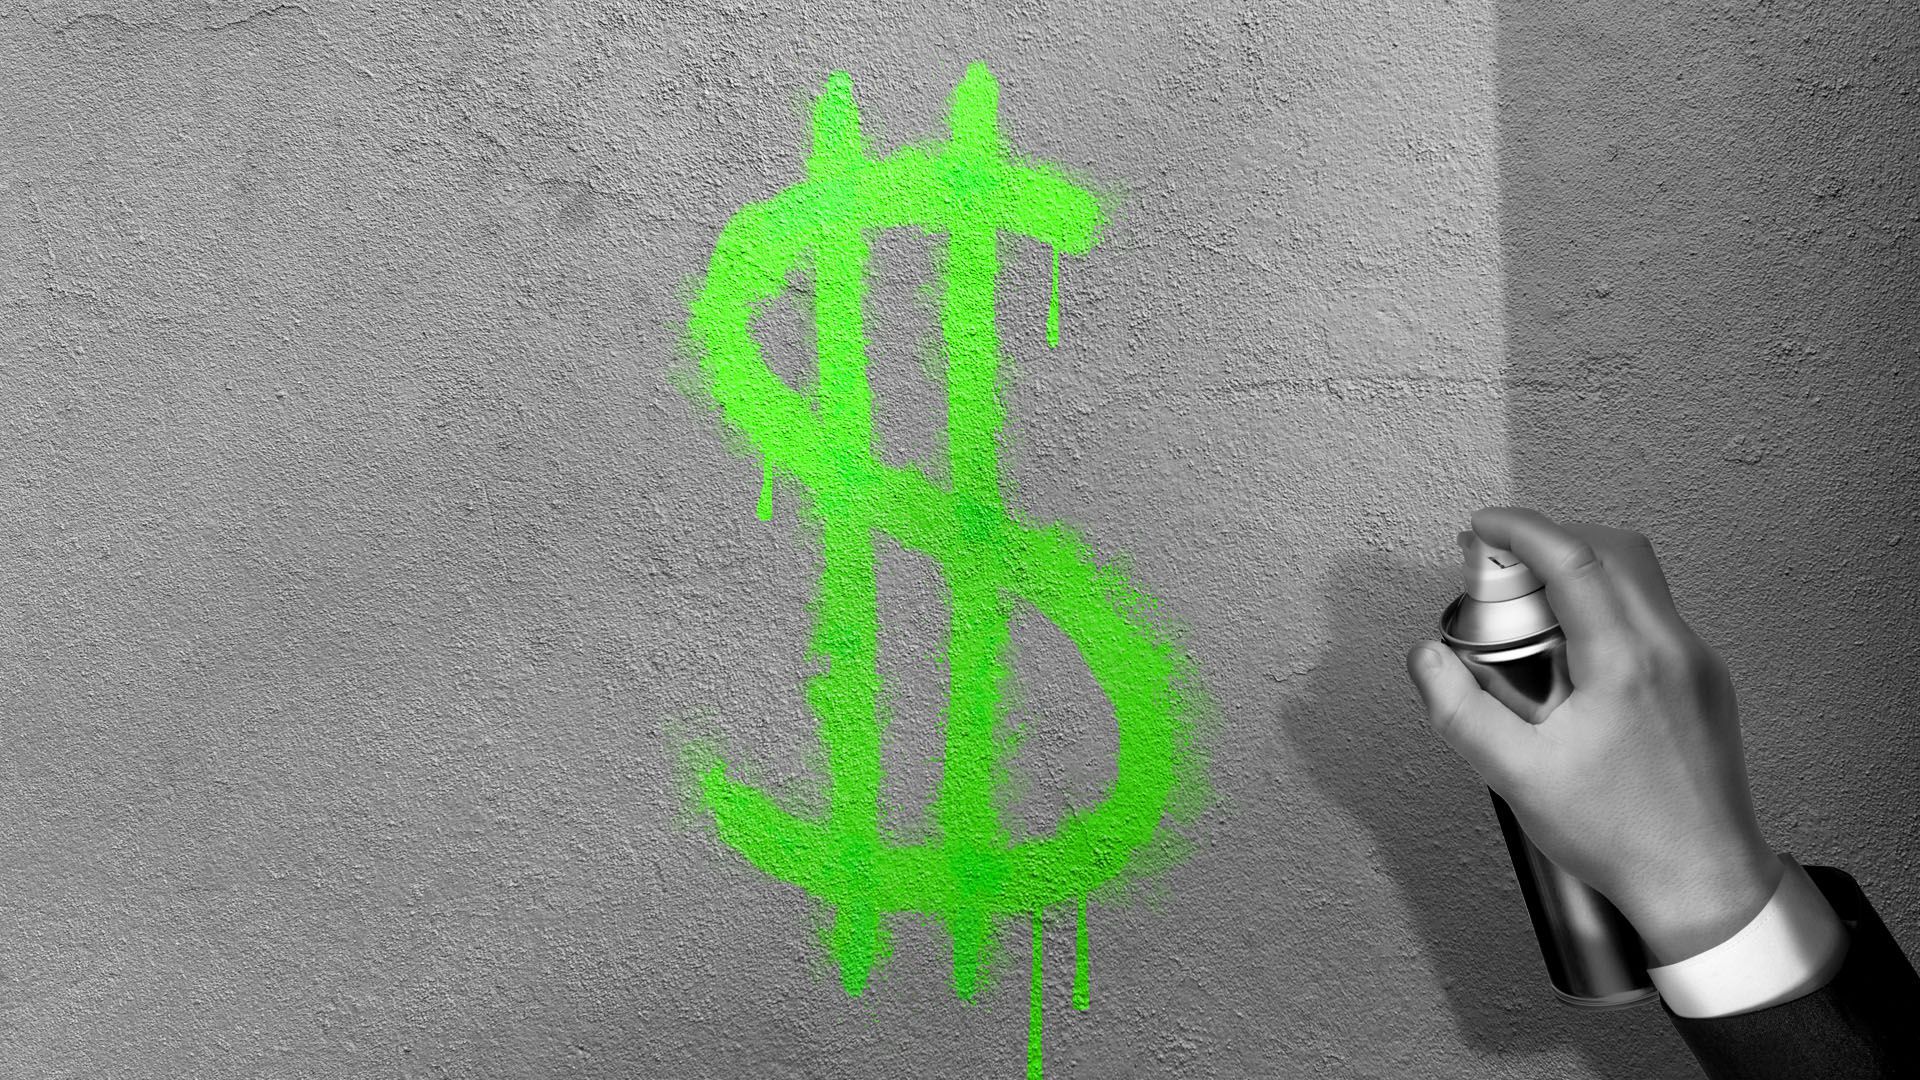 Illustration of a hand in a business suit spray painting a dollar sign on a wall.